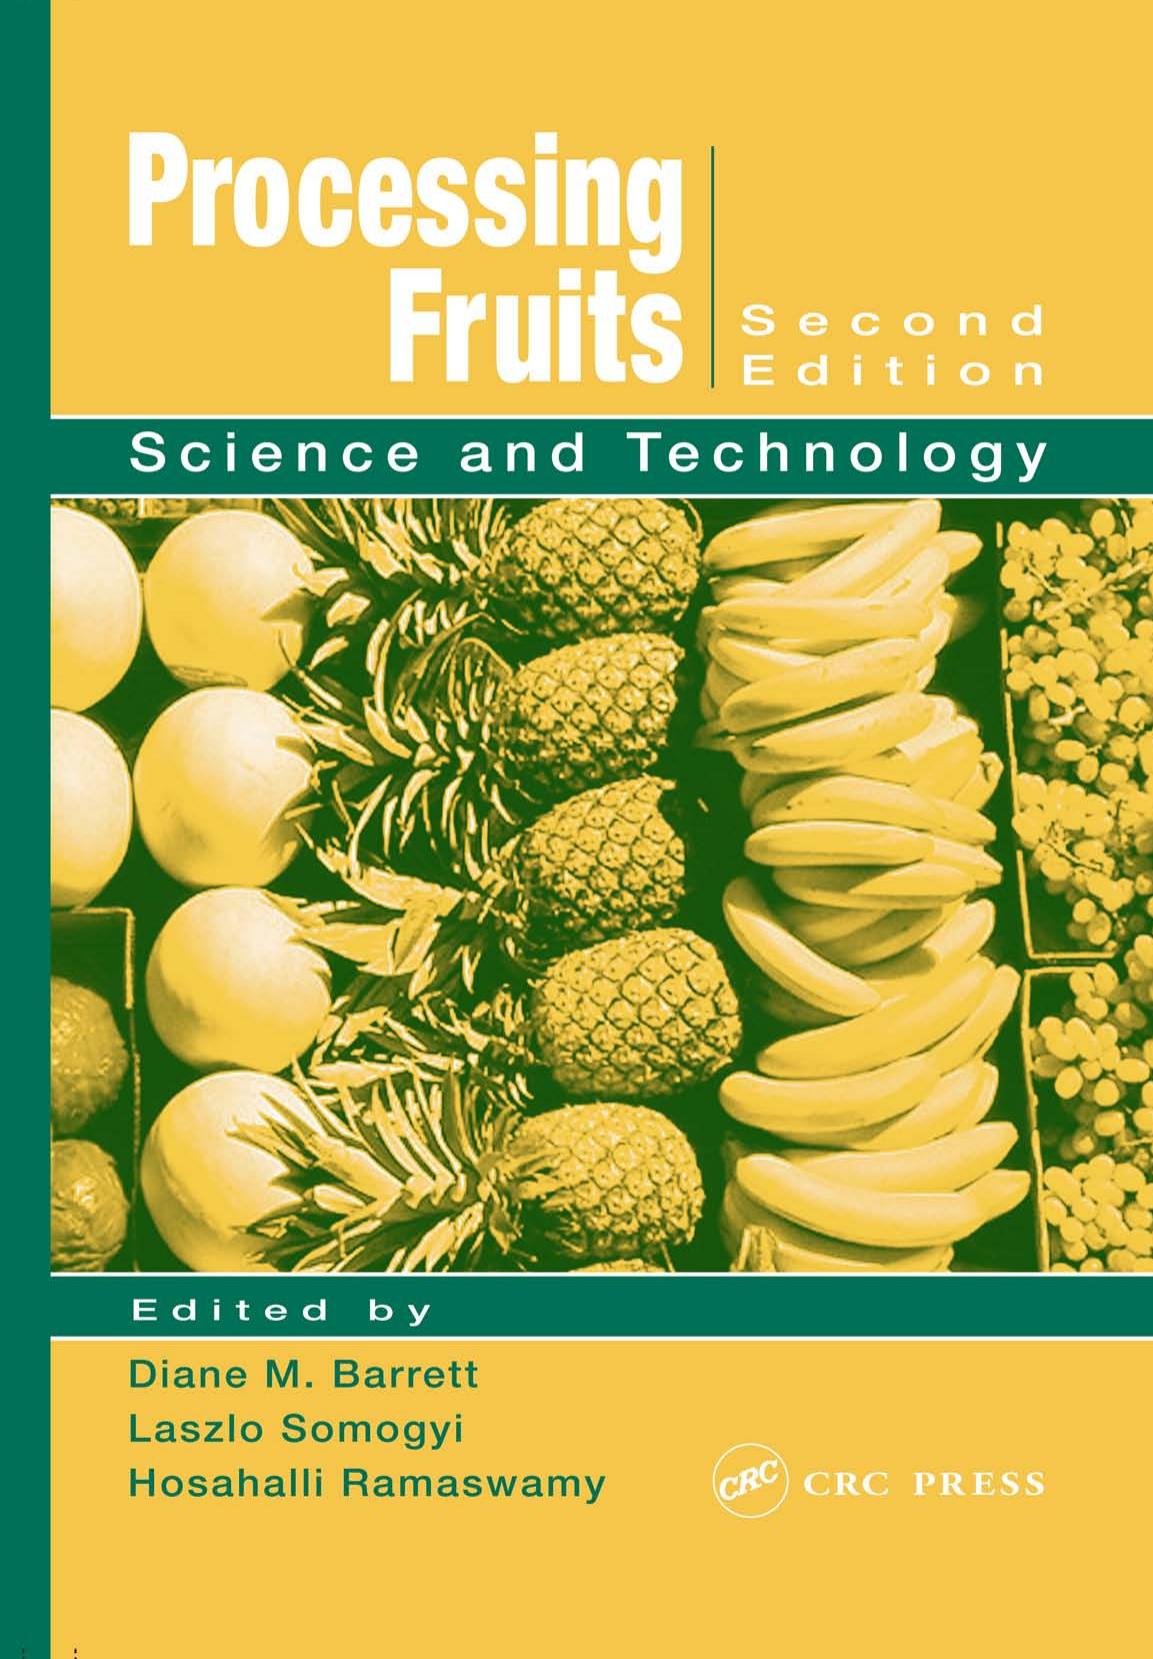 Processing Fruits Science and Technology 2005